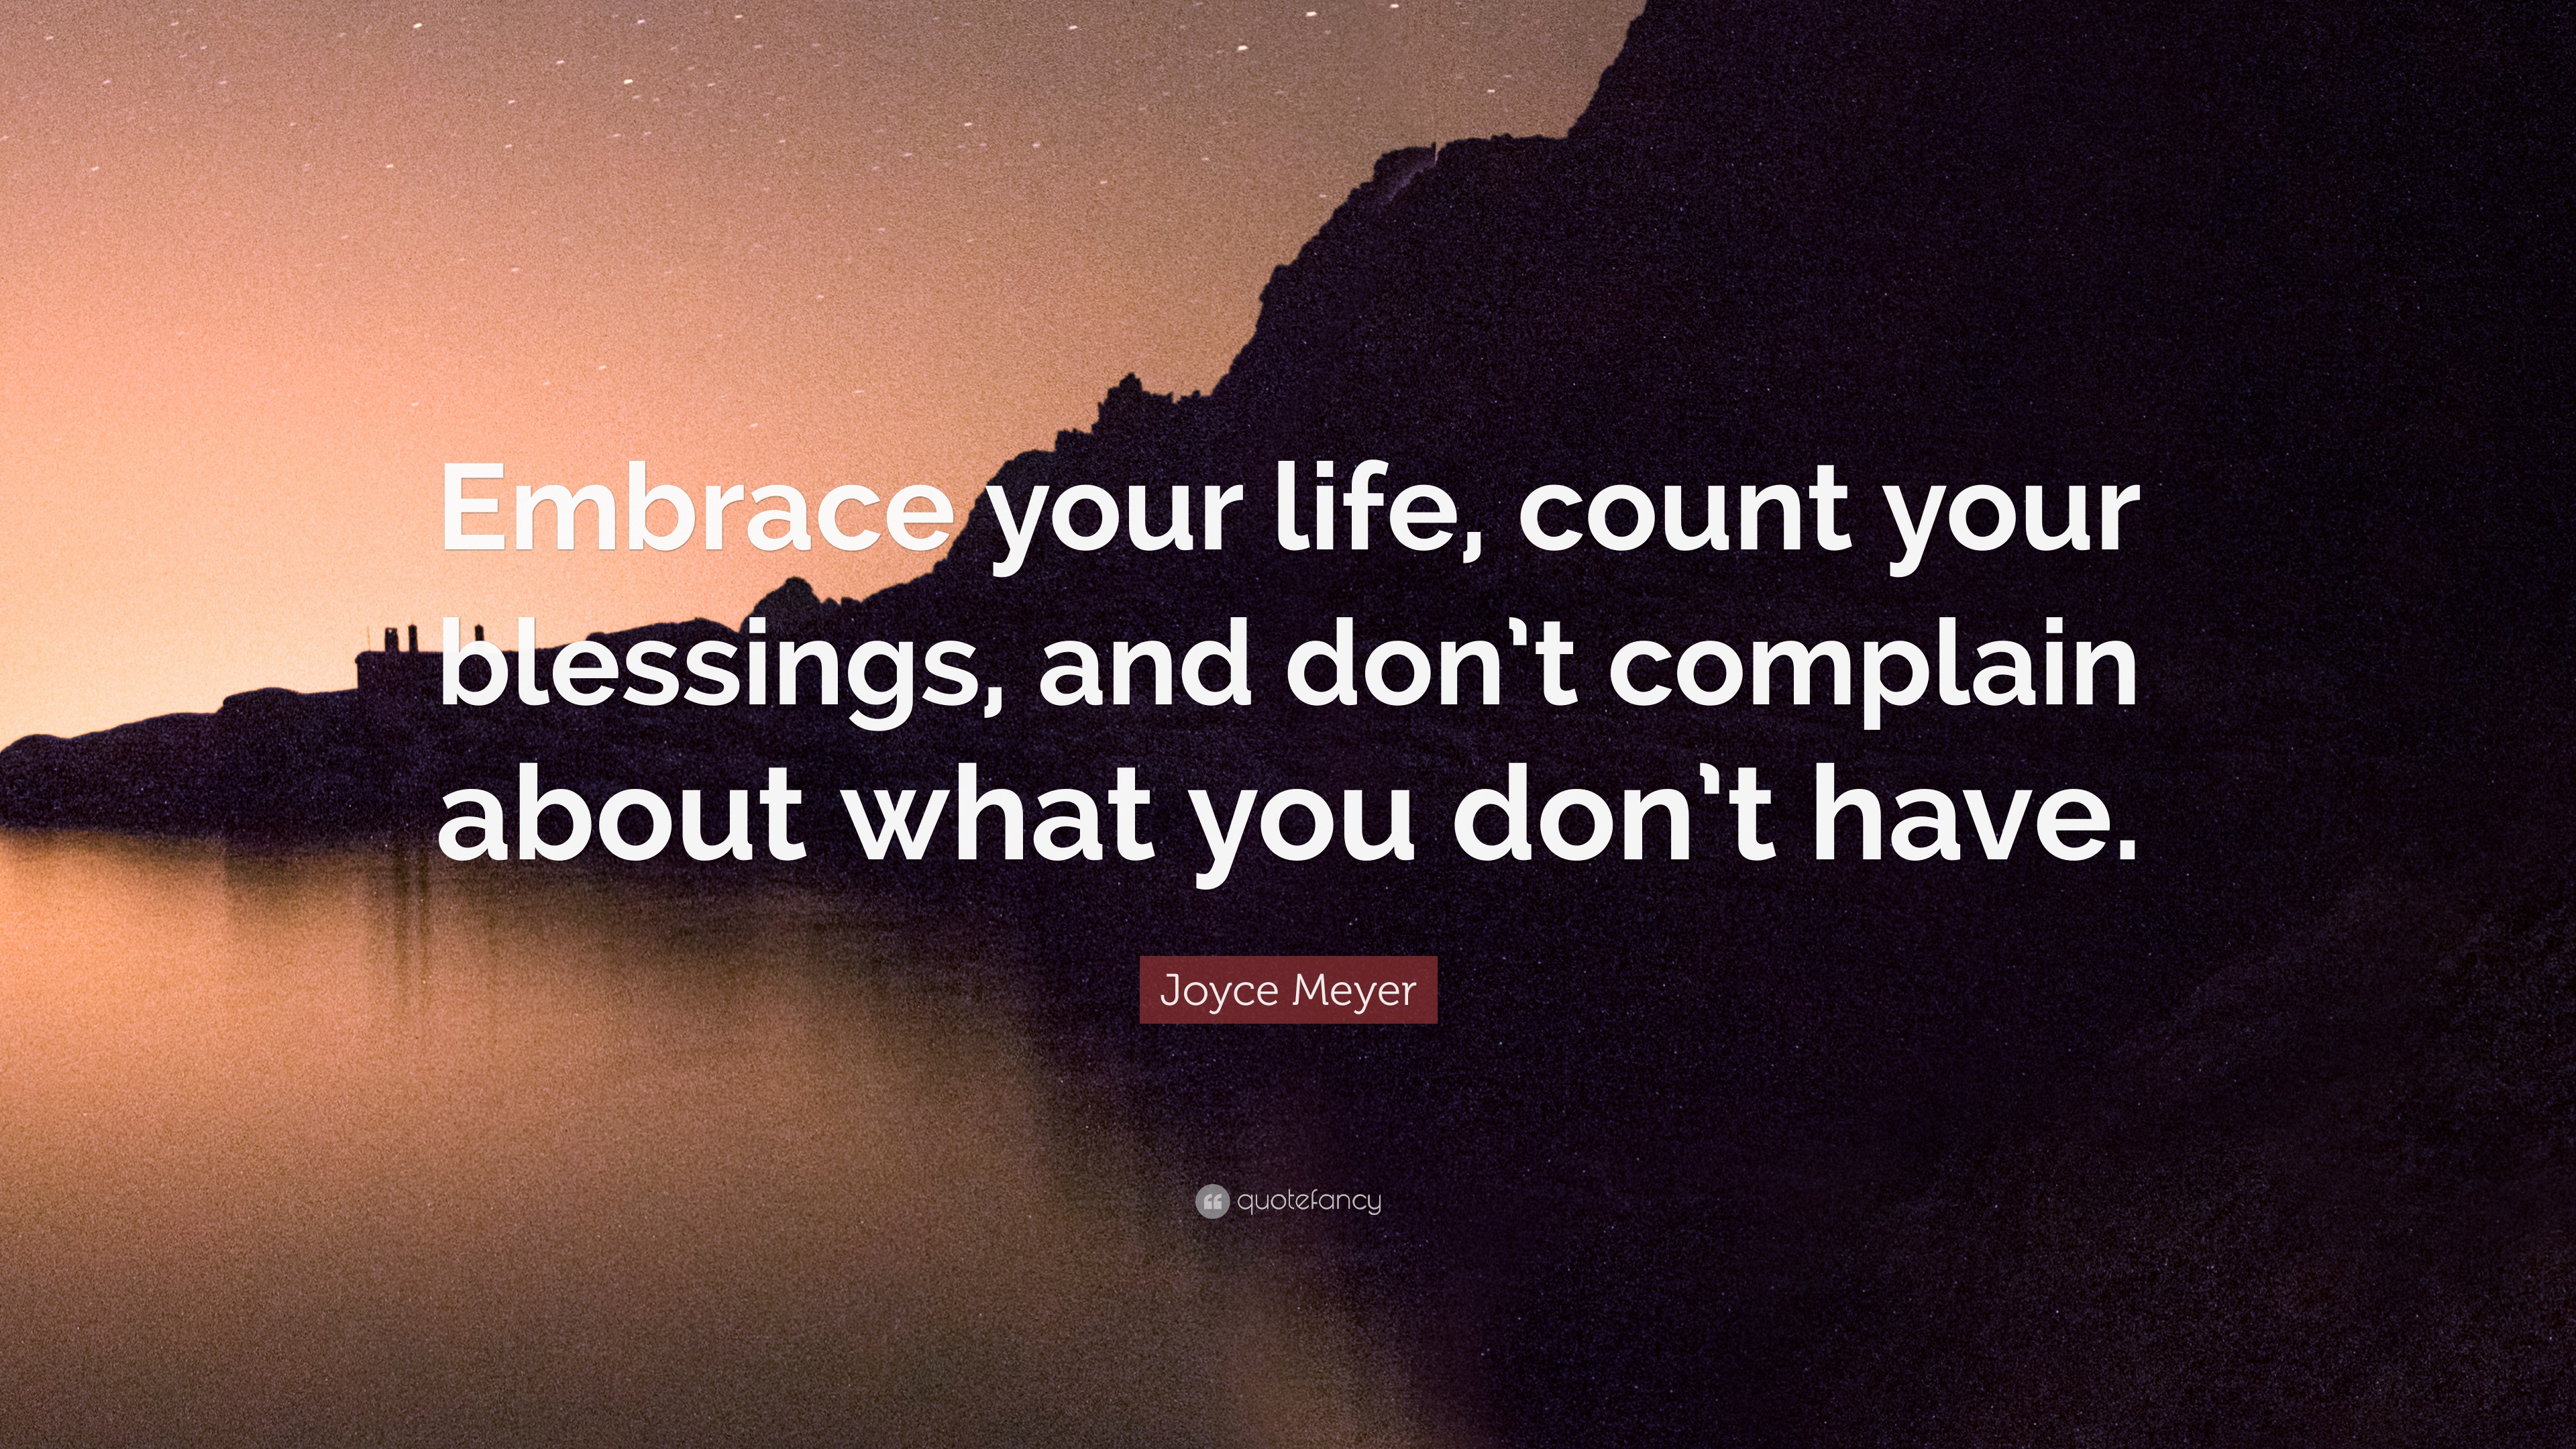 Joyce Meyer Quote “embrace Your Life Count Your Blessings And Dont Complain About What You